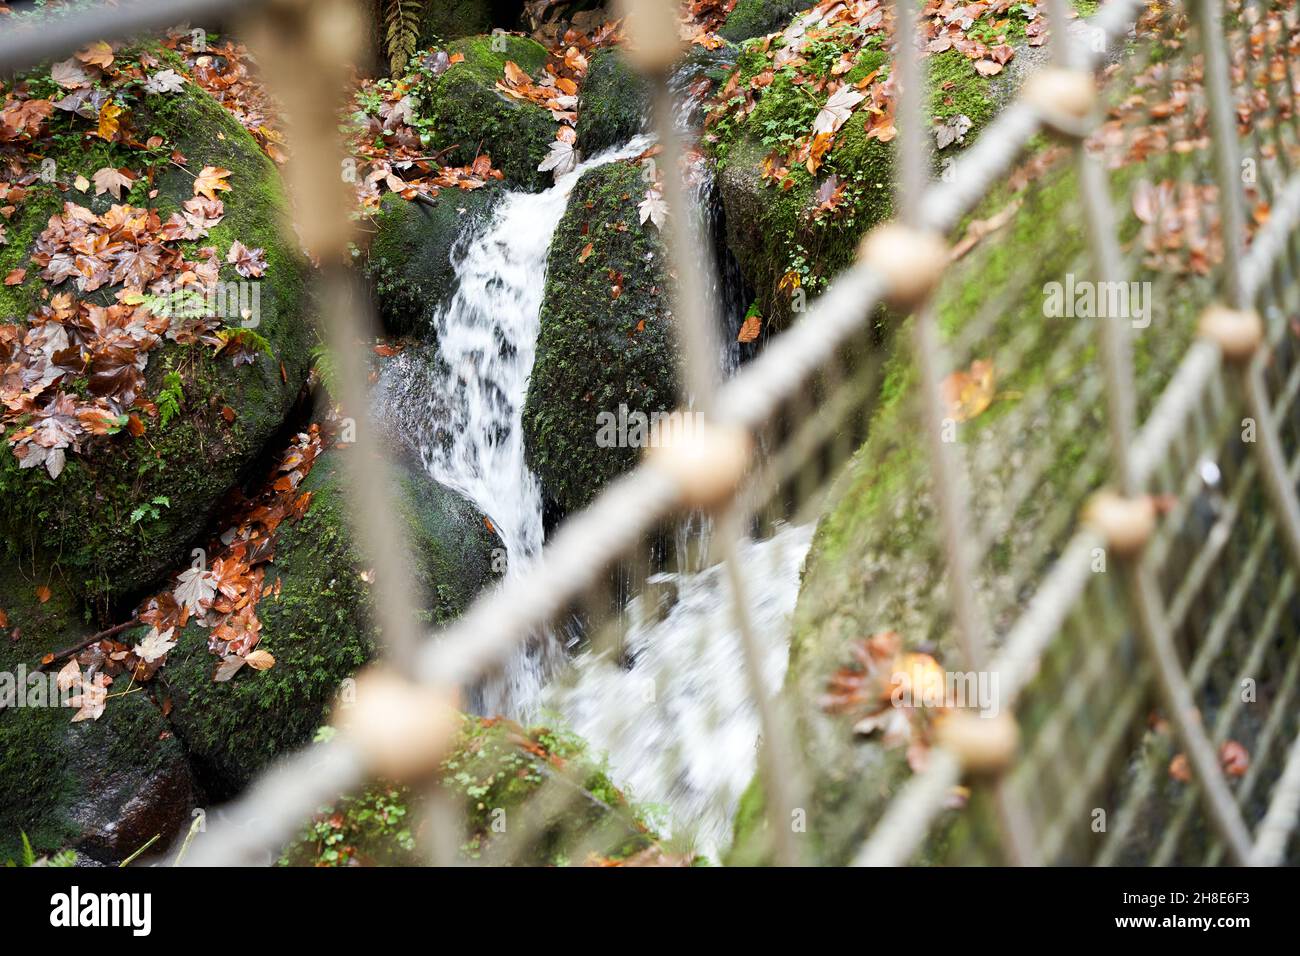 Small waterfall in the Black Forest photographed through a network of ropes. Germany, Blackforest, Gertelbach. Stock Photo